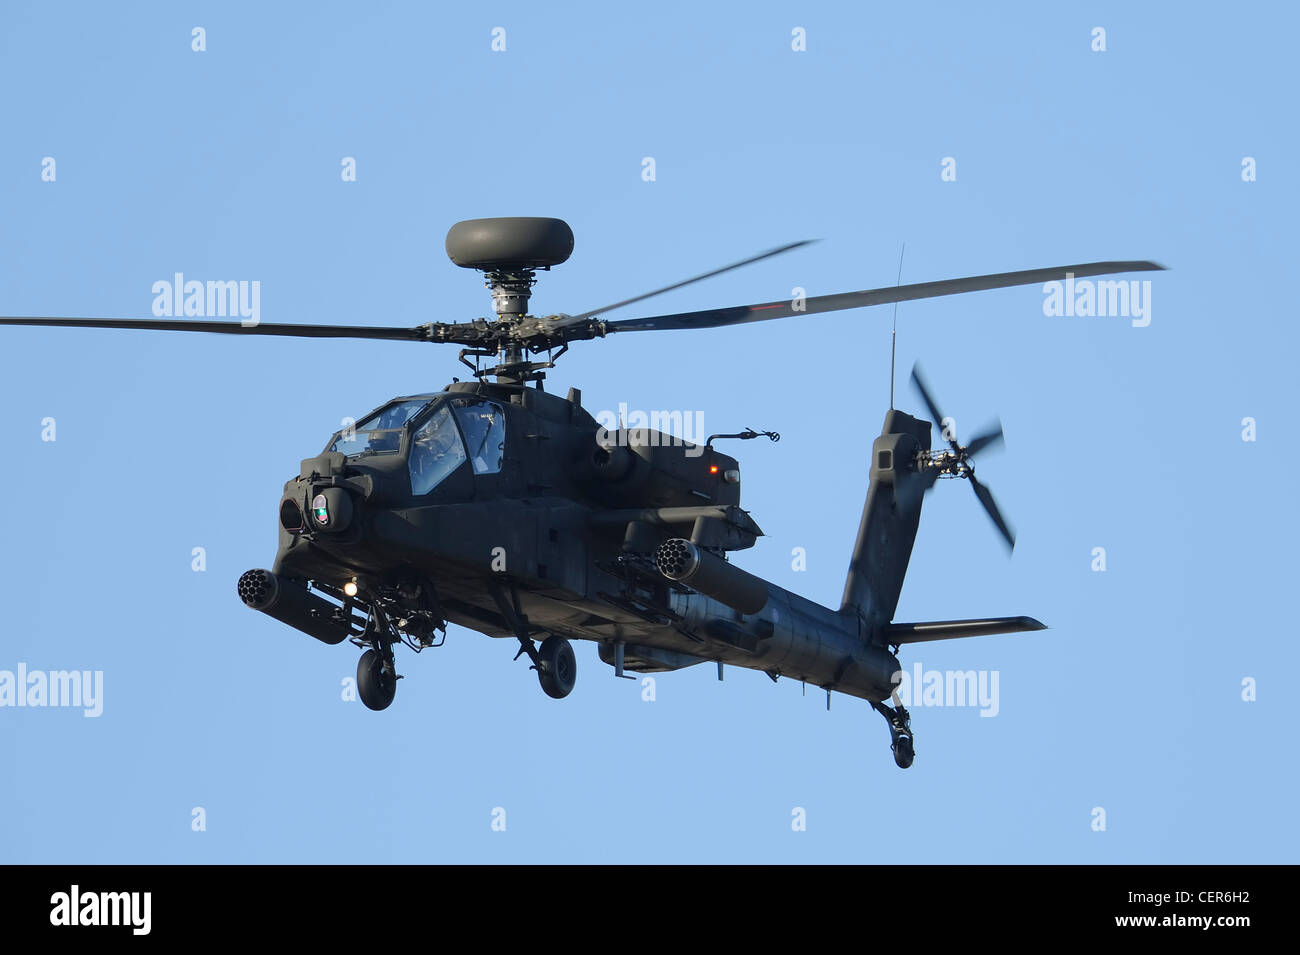 ah-64 apache helicopter in flight Stock Photo